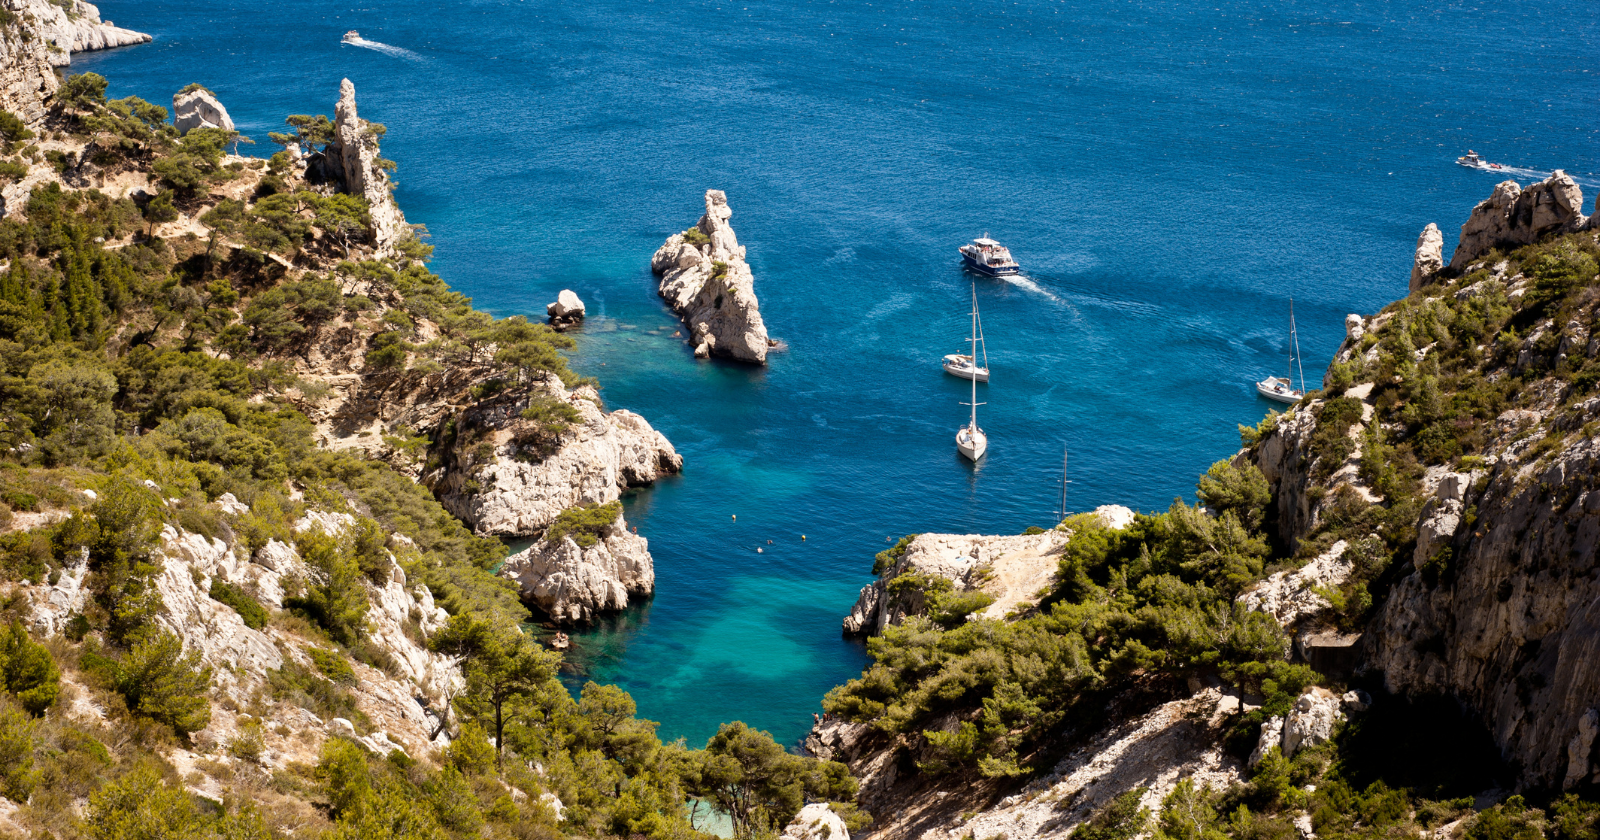 To preserve the Calanques, Marseille will introduce a "visit permit"